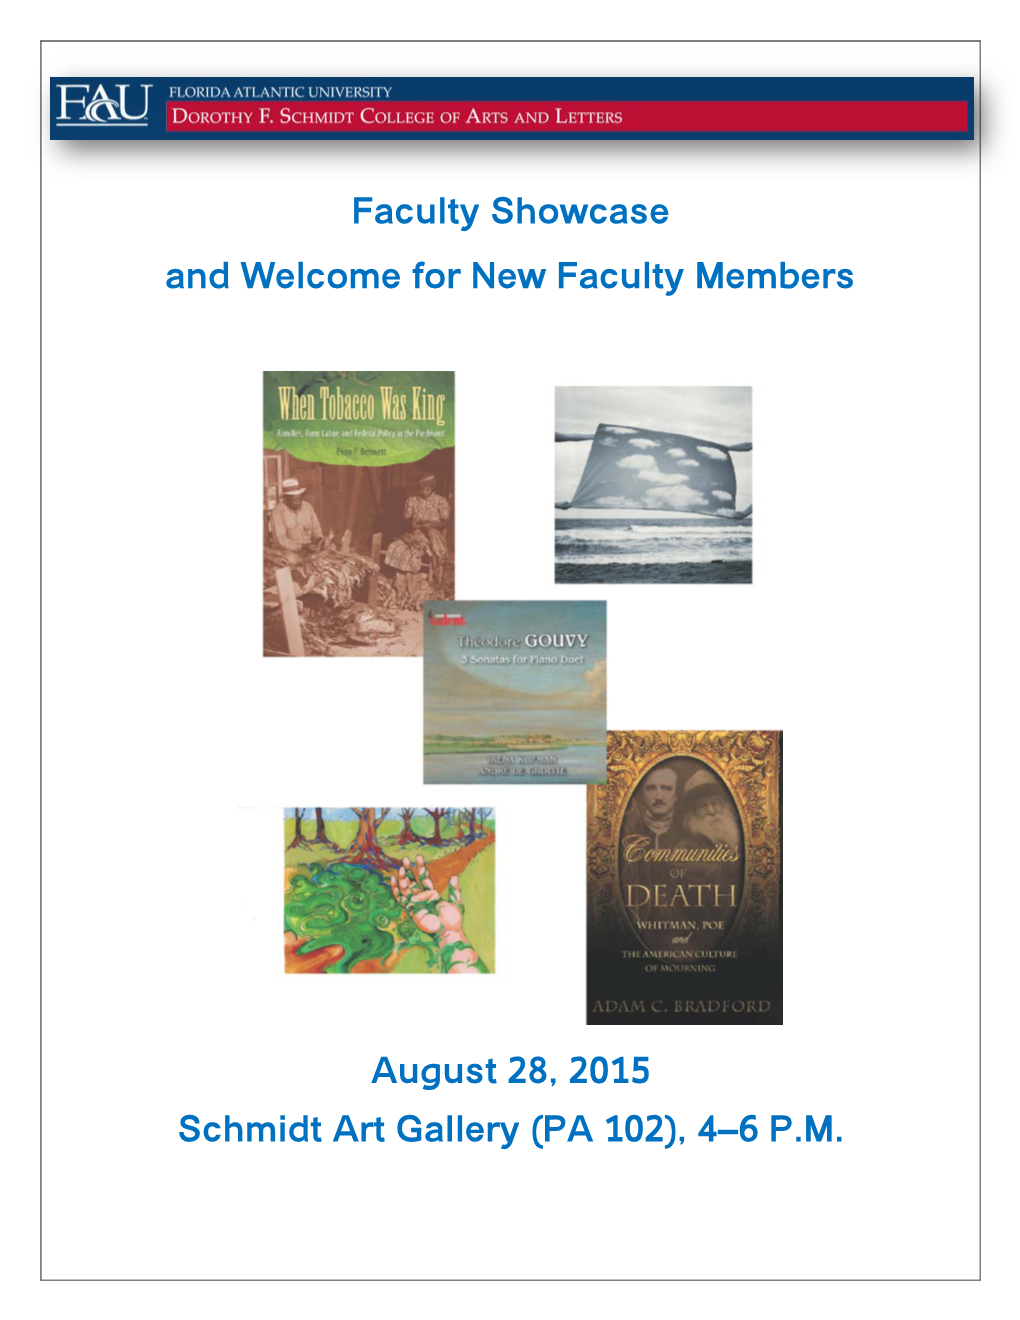 Faculty Showcase and Welcome for New Faculty Members August 28